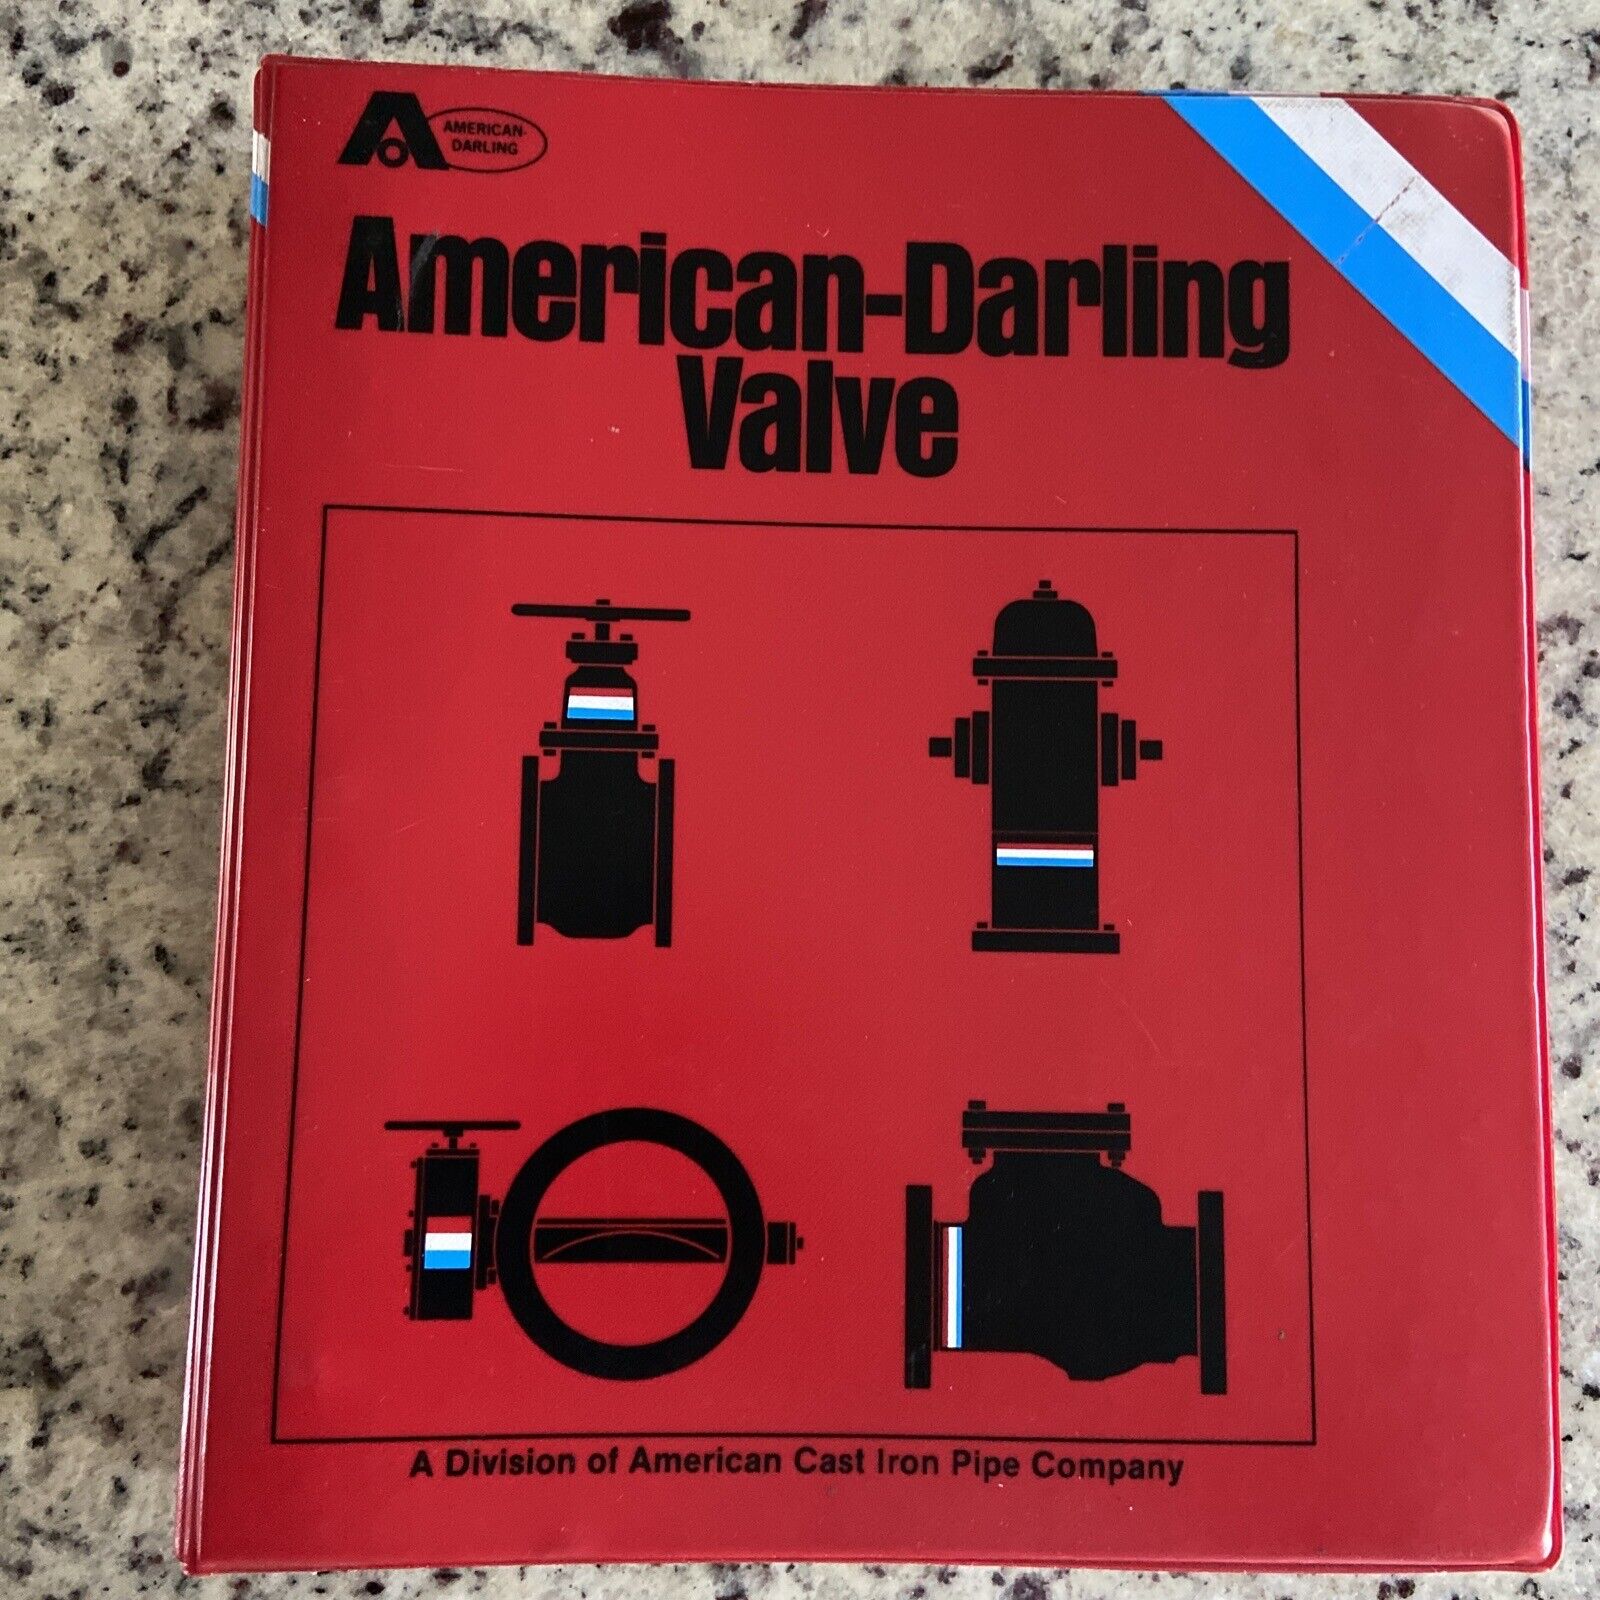 Vintage 1985-88 American Darling VALVES FIRE HYDRANTS CATALOG GUIDE Trade Water